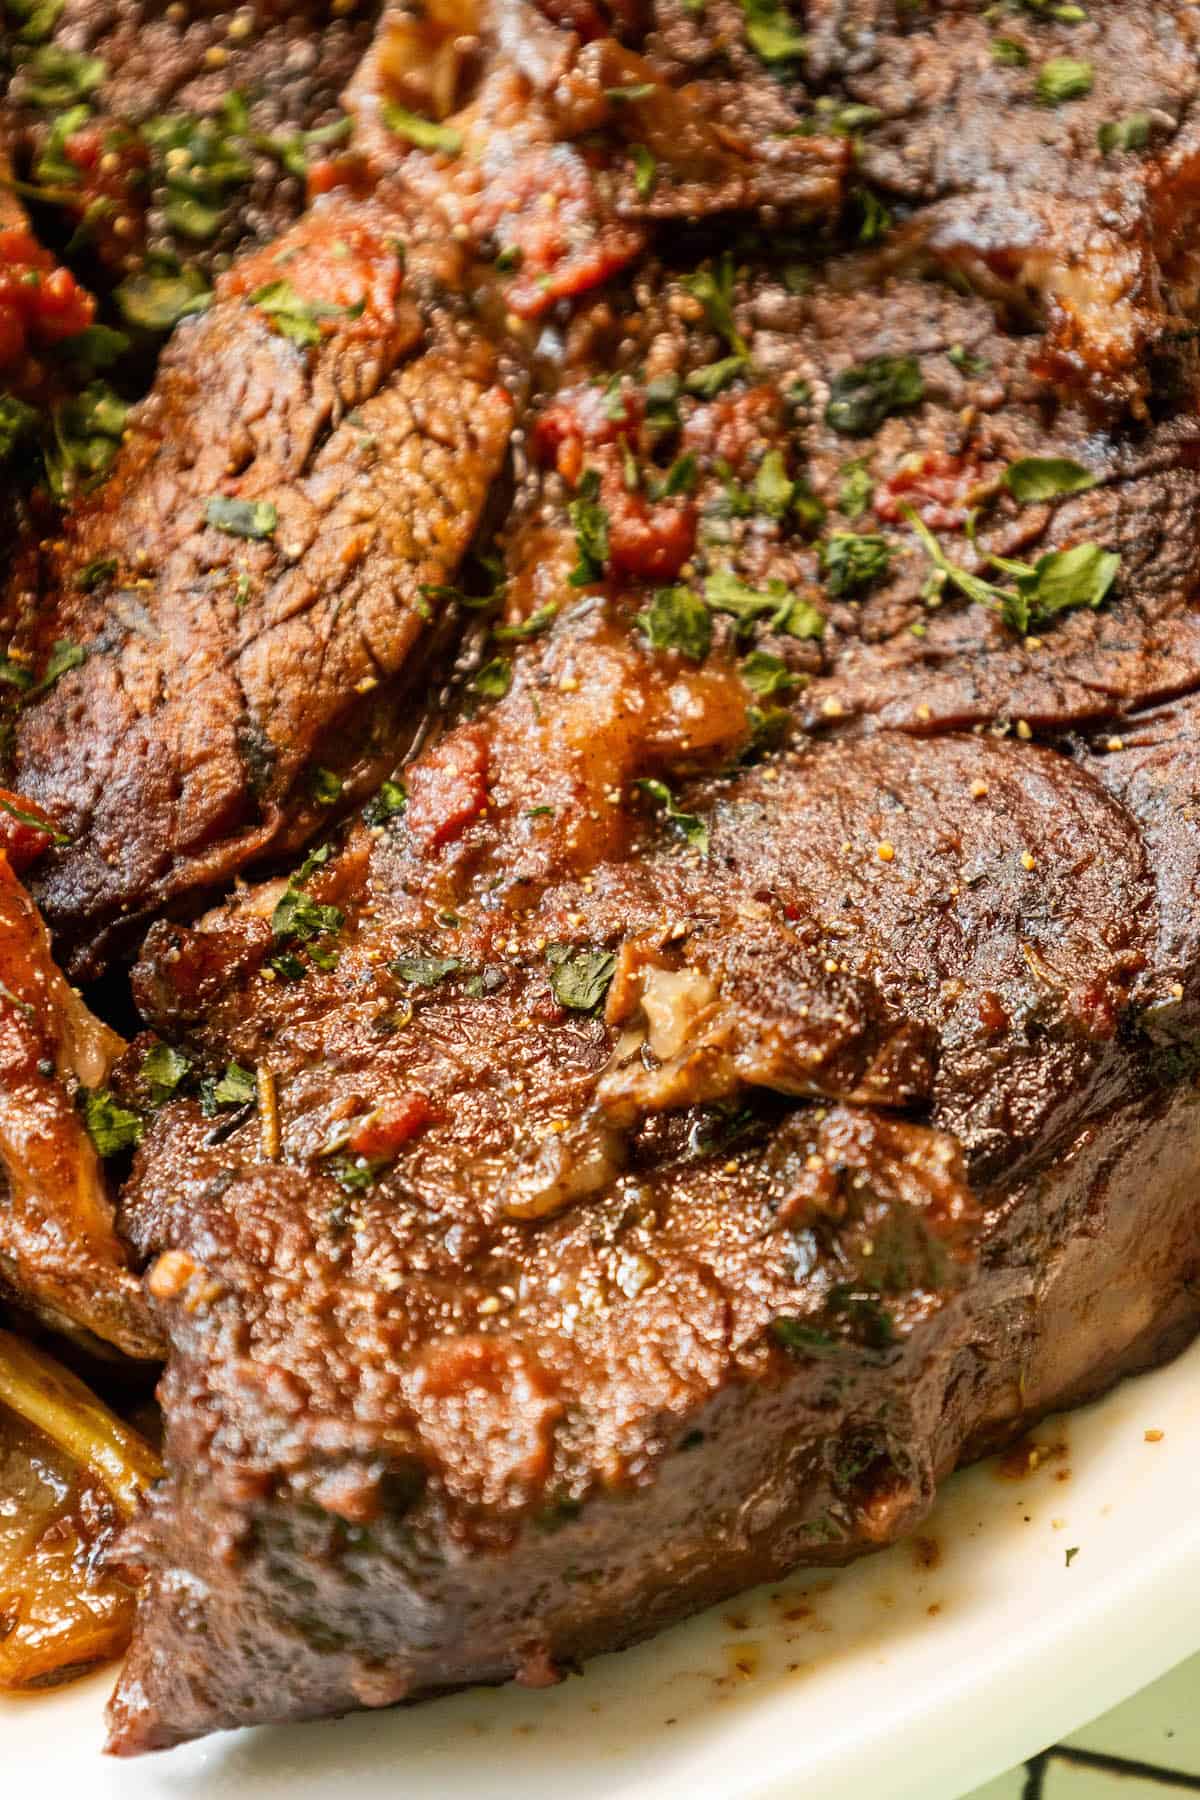 A perfect chuck roast with sauce and herbs.